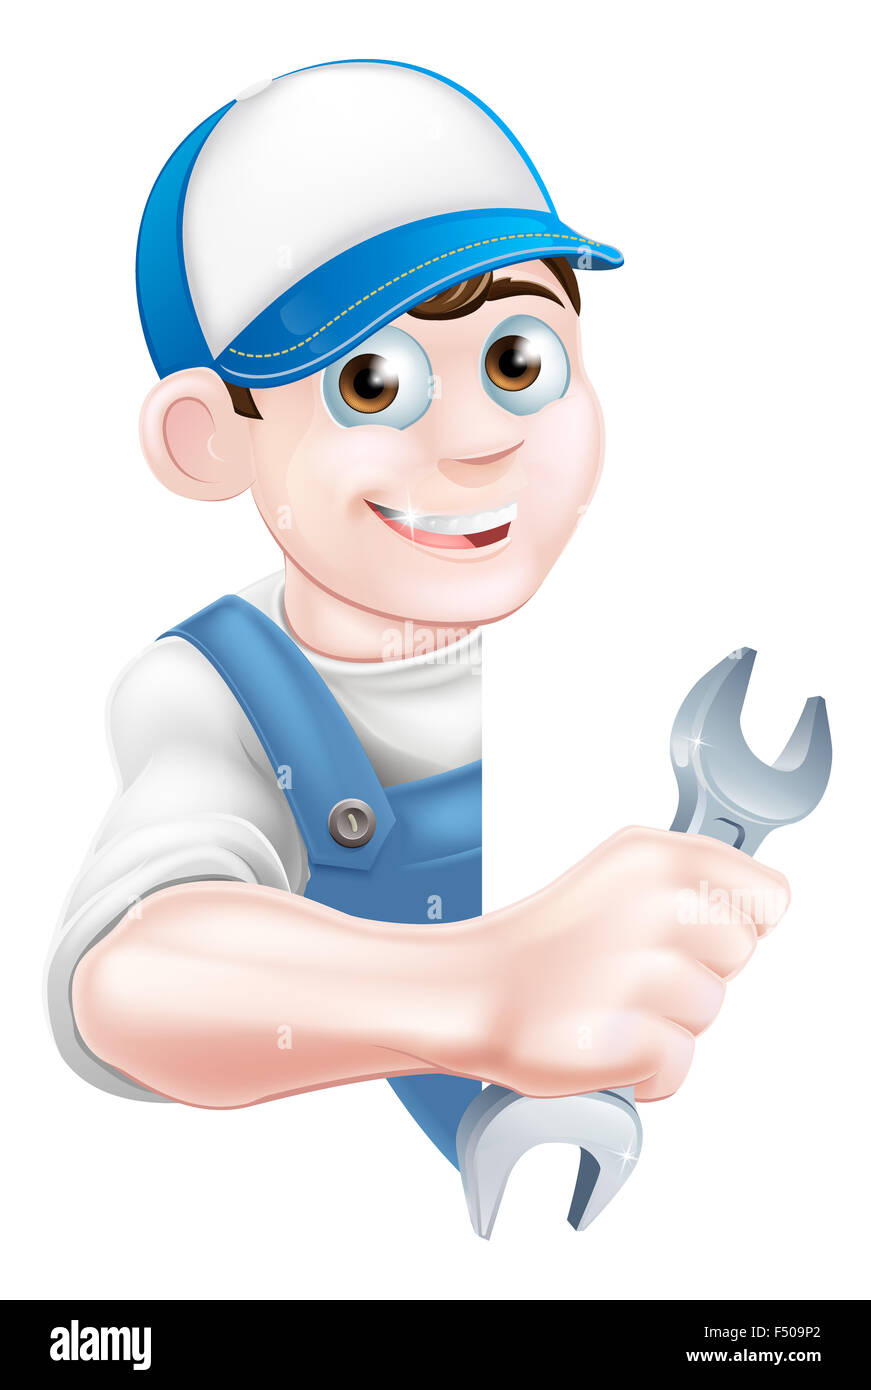 Cartoon plumber or auto repair mechanic service handyman worker man holding a spanner or wrench Stock Photo